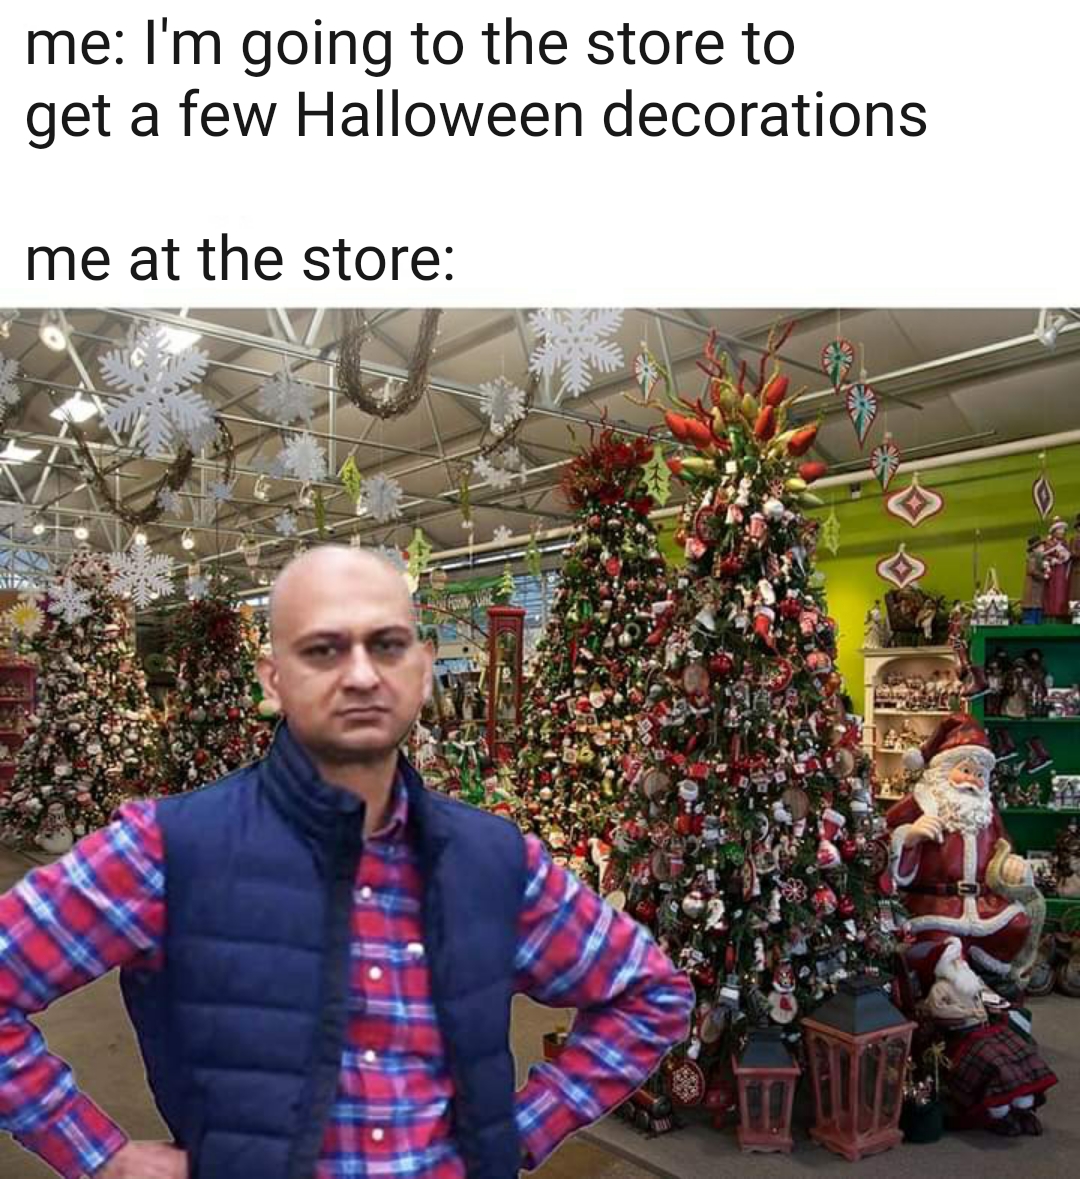 tree - me I'm going to the store to get a few Halloween decorations me at the store